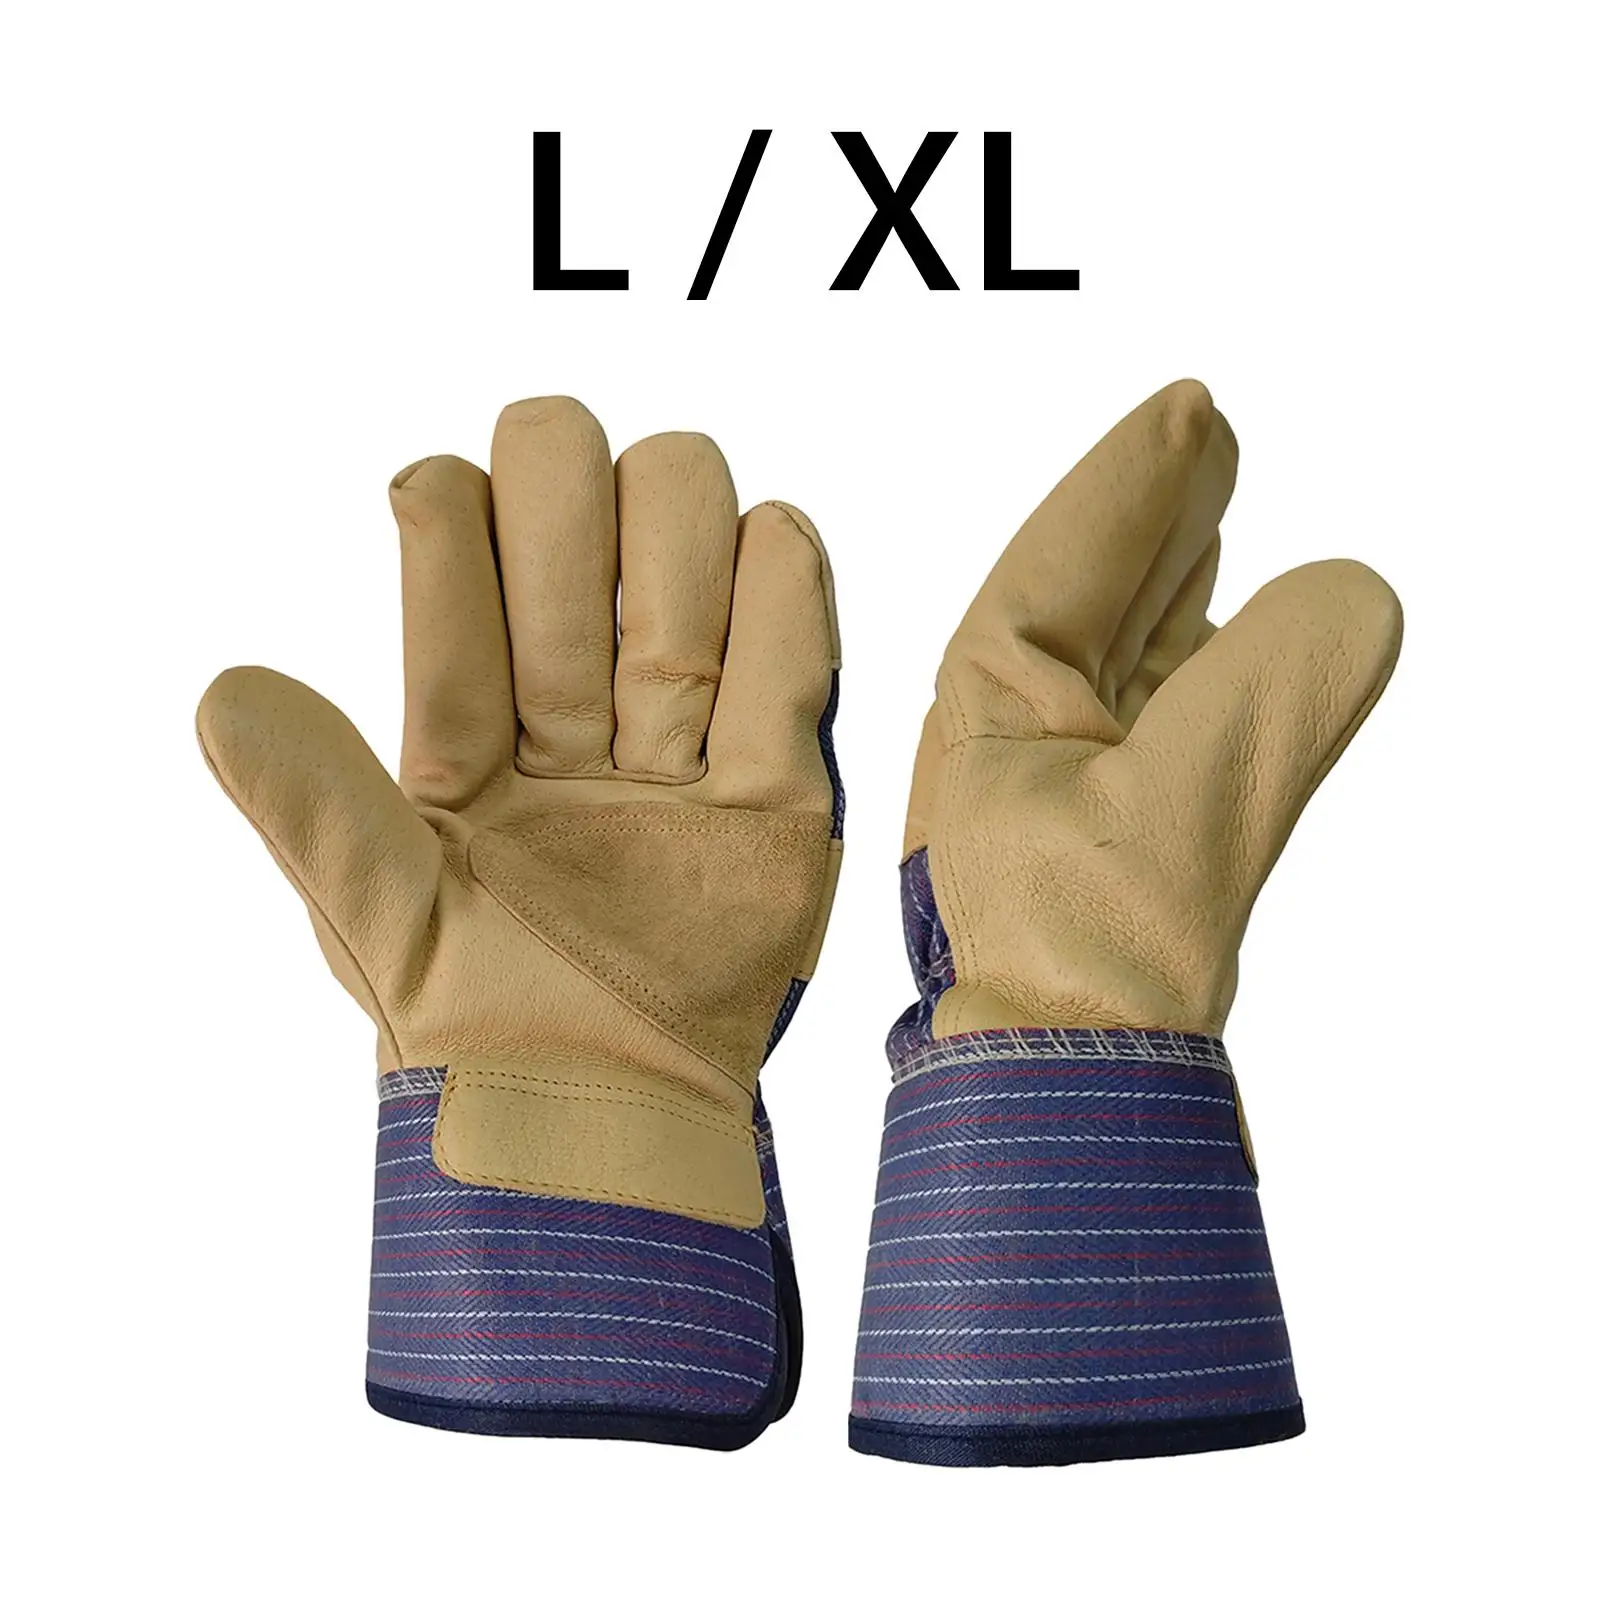 PU Leather Welding Gloves Heavy Duty with Reinforced Palm Durable Protective Gloves Welding Accessories for Stove Oven Baking